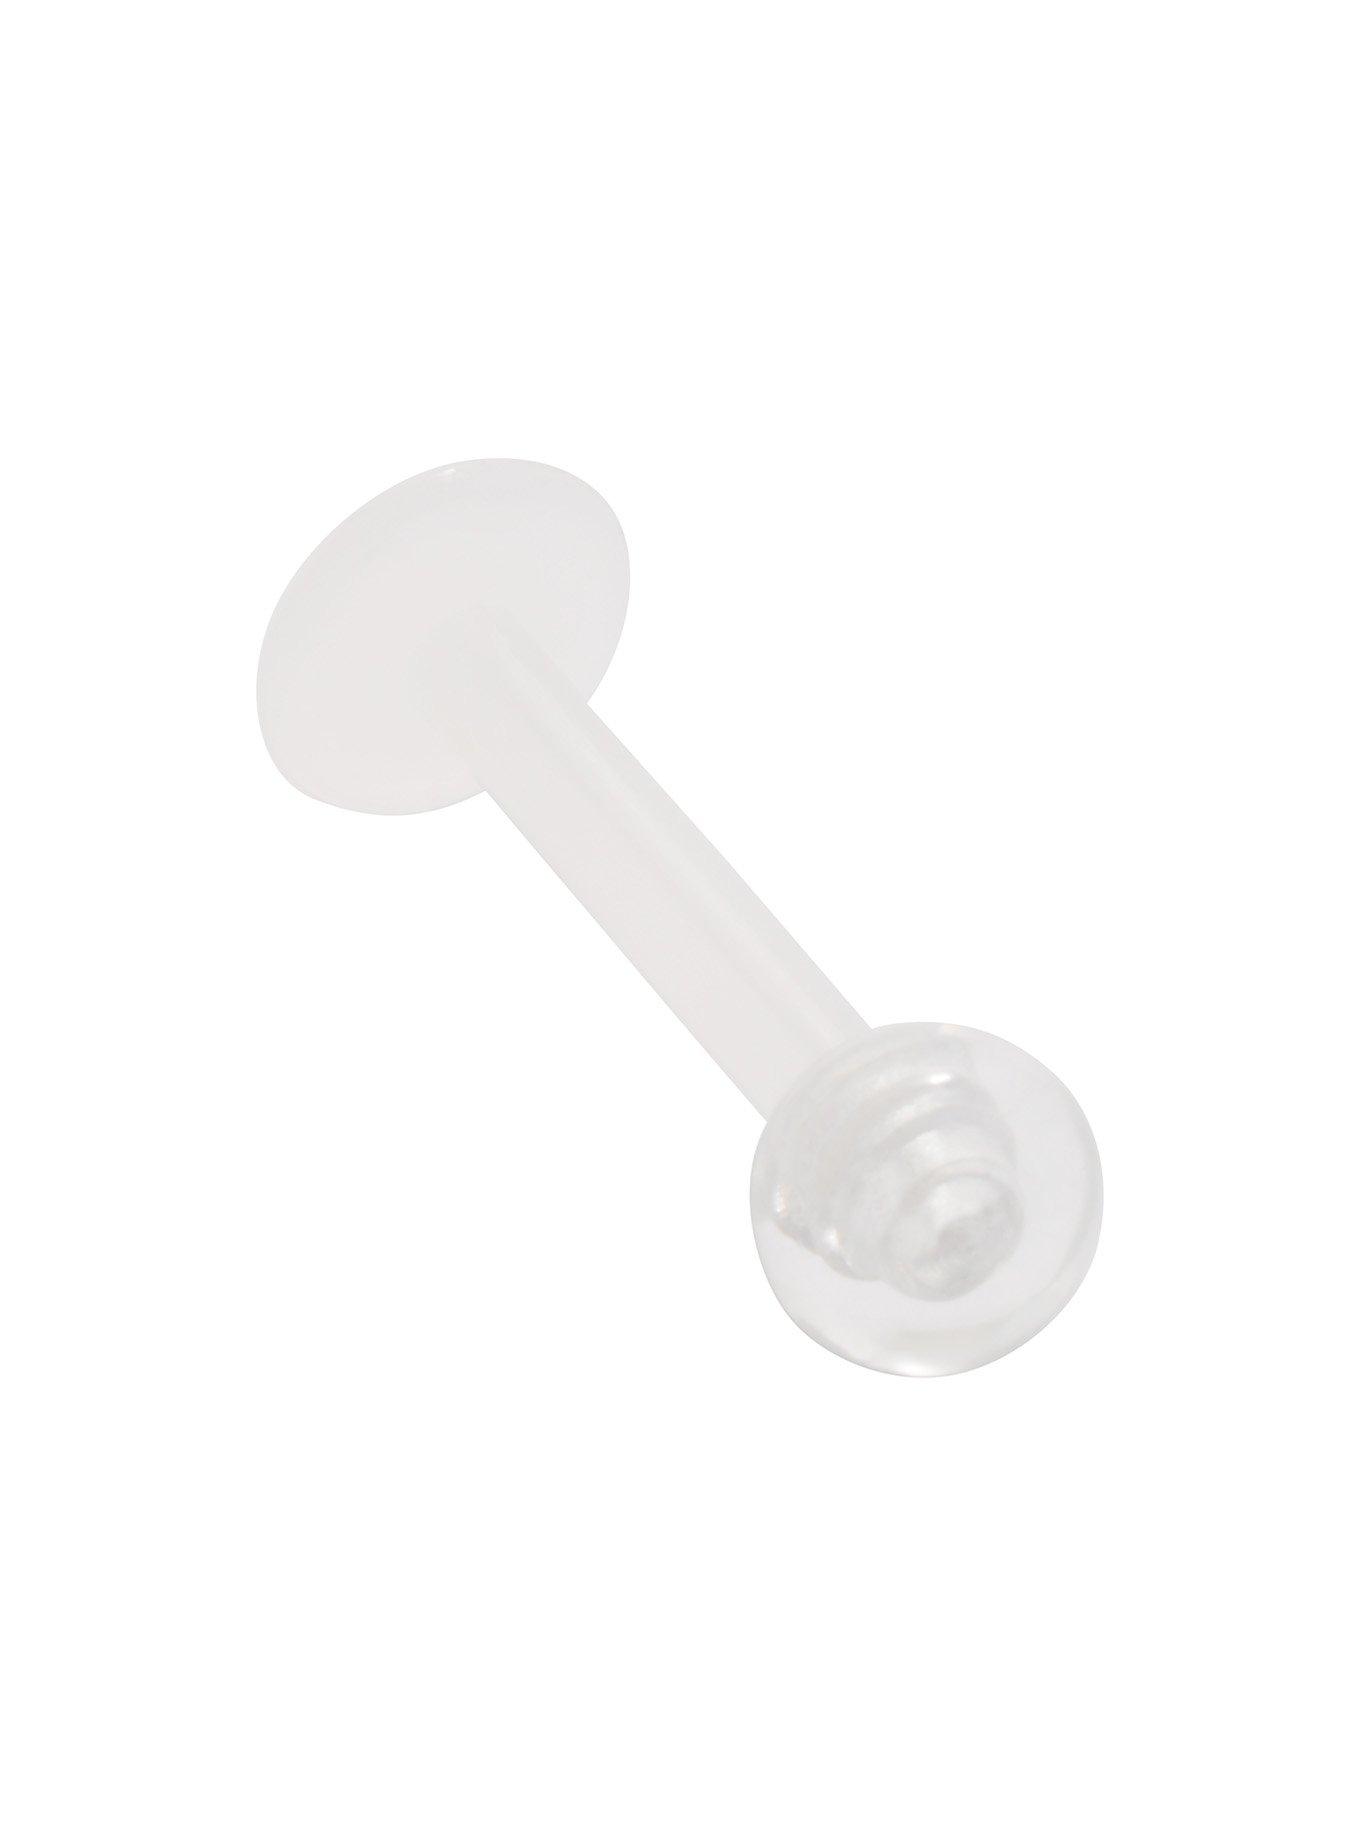 14G 3/8 Acrylic White Clear Ball Labret Stud, CLEAR, hi-res